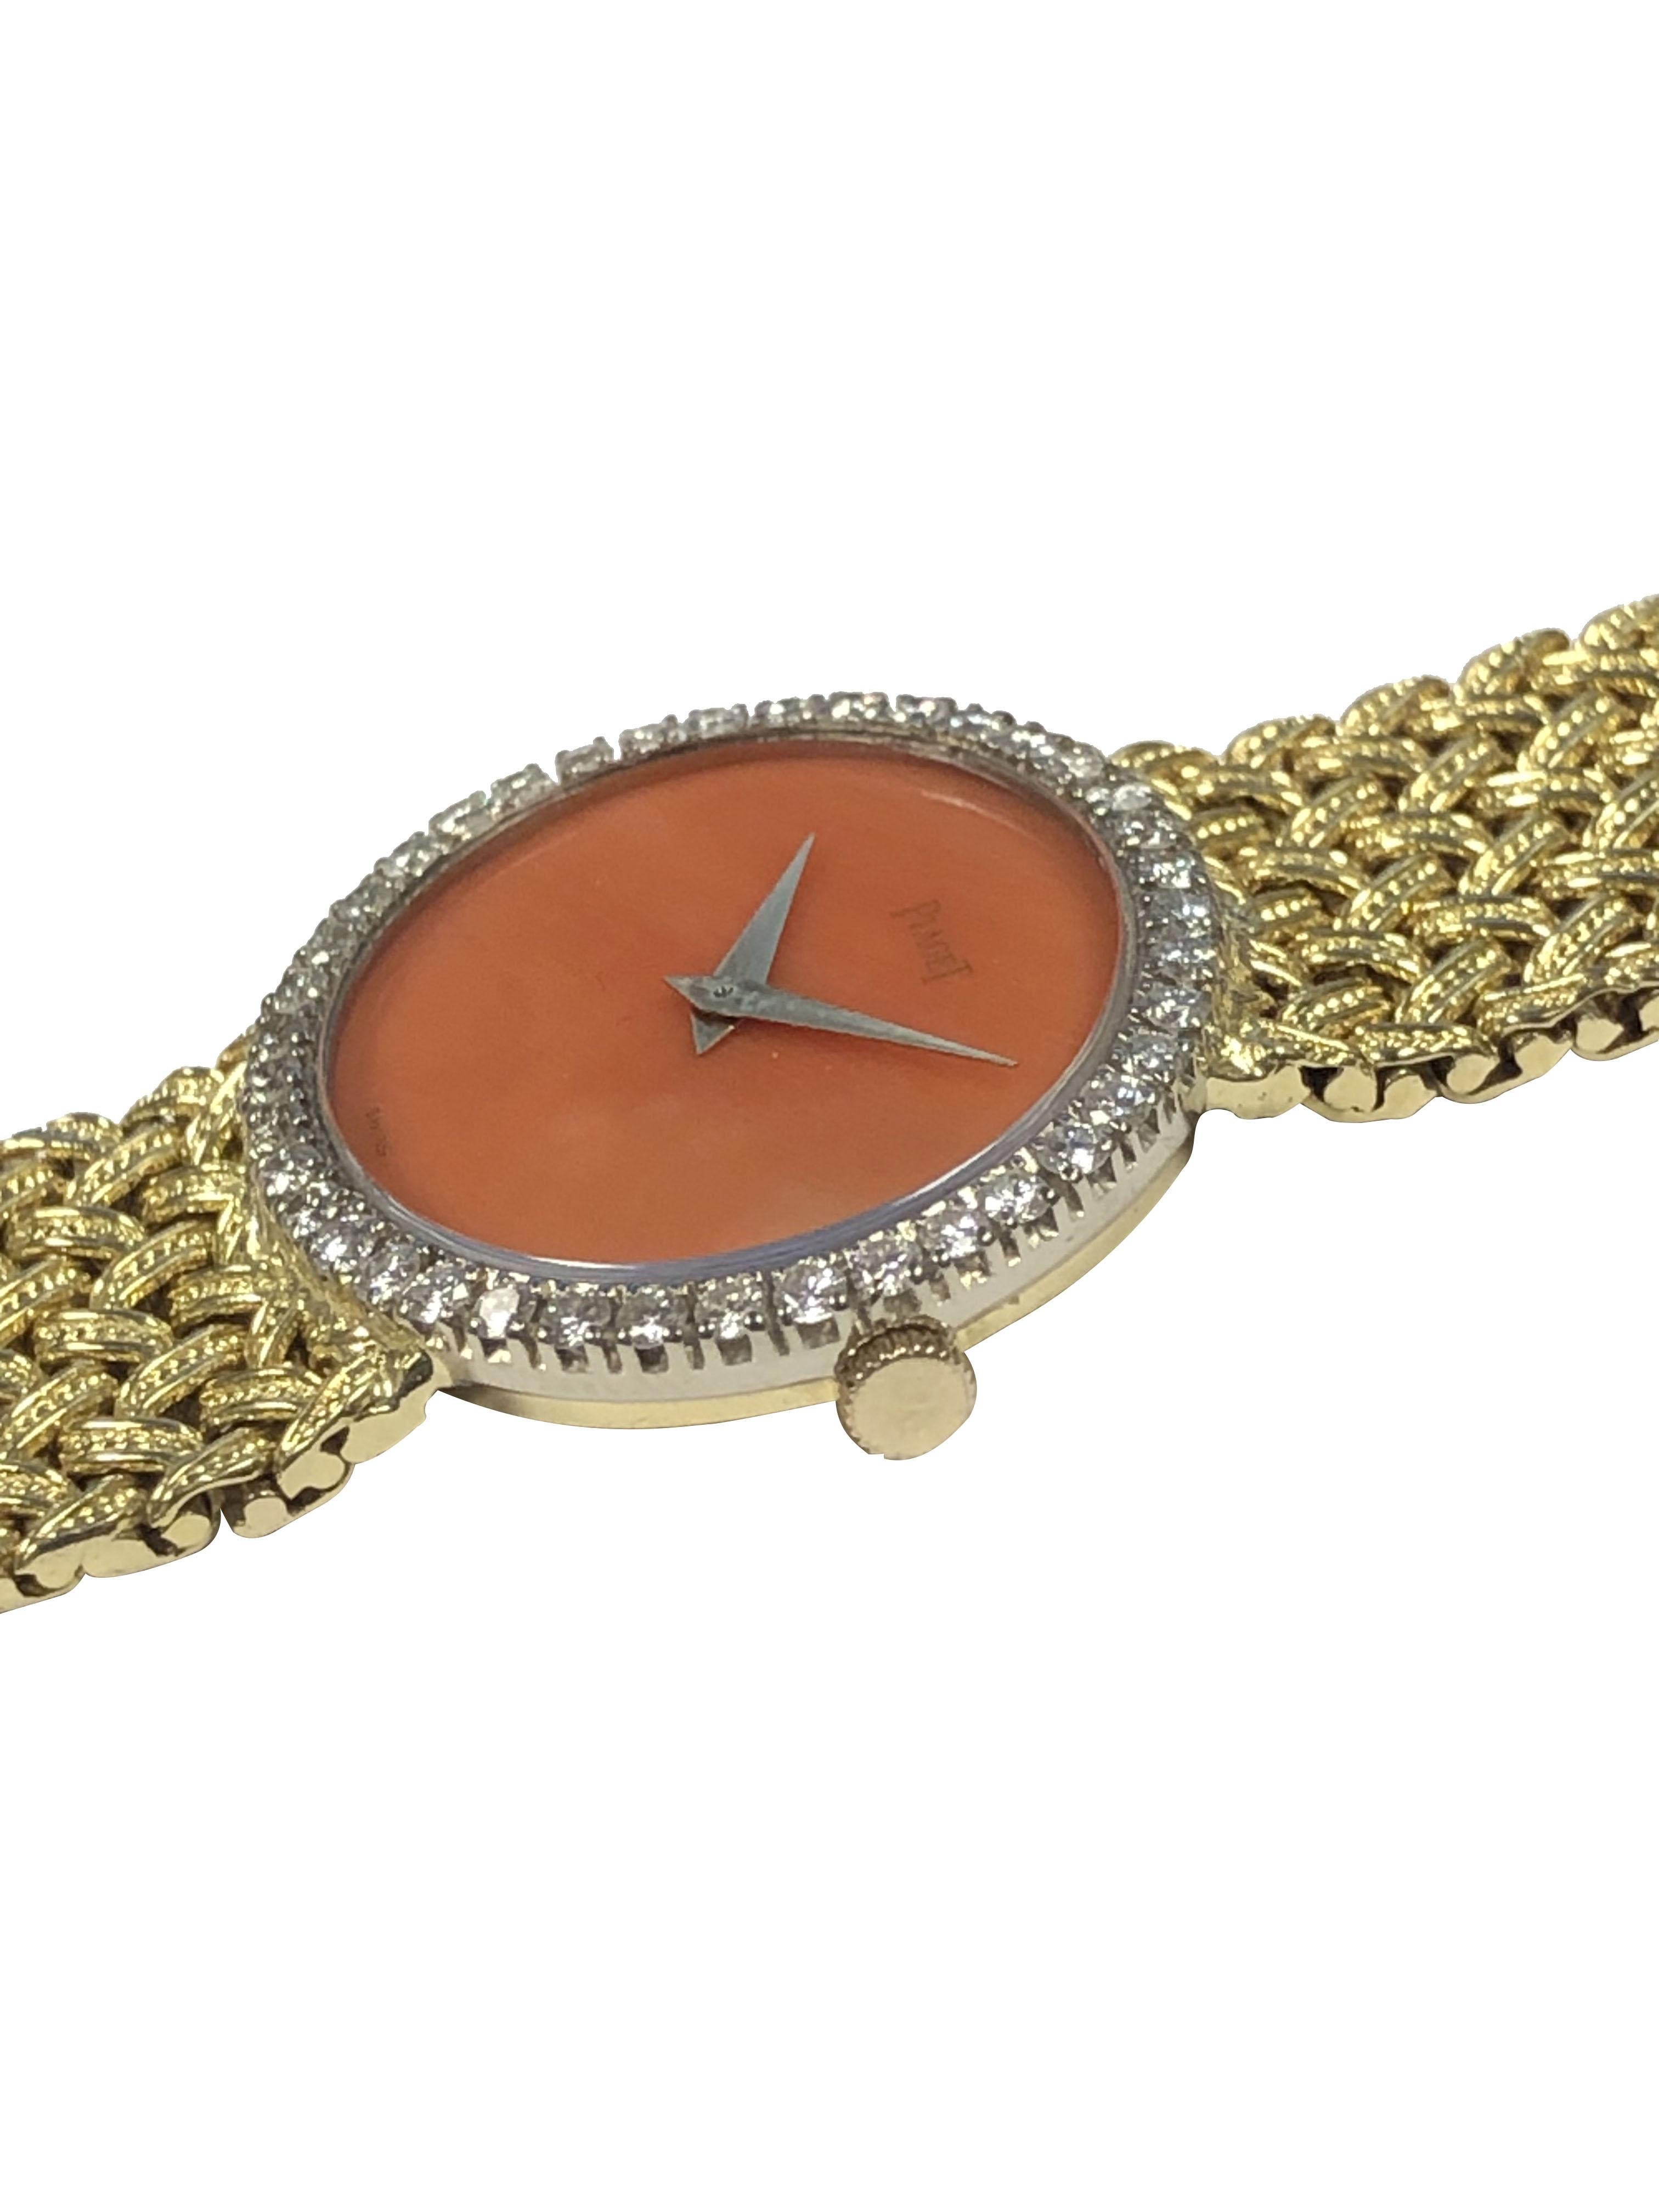 Circa 1970s Piaget Ladies Wrist Watch, 27 x 24 M.M. 18k Yellow Gold 2 piece Oval Case, Round Brilliant cut Diamonds totaling approximately 1 carat, 17 Jewel, Mechanical, Manual wind Movement, Orange - Red Coral Dial. 5/8 inch wide integrated woven